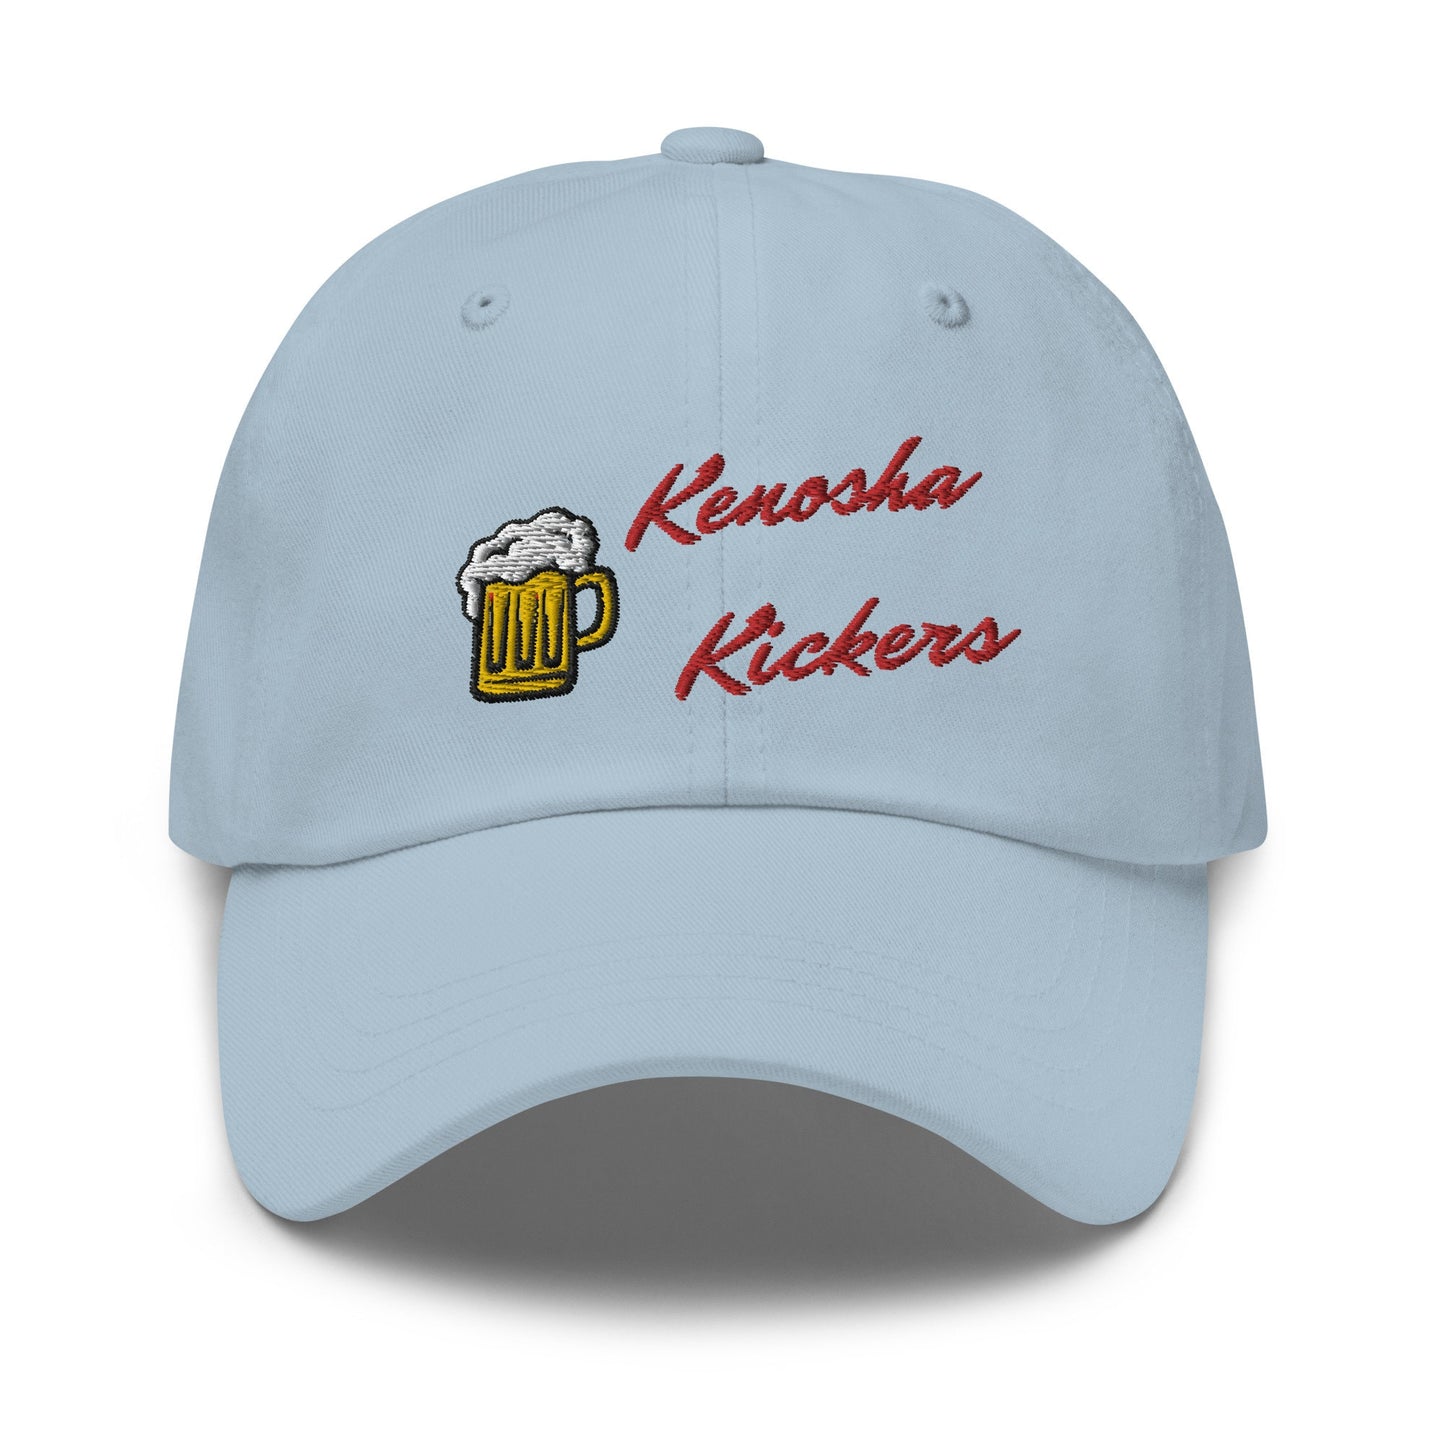 Kenosha Kickers Hat - Funny Christmas Gift - Secret Santa - Ugly Christmas Sweater Party - Multiple Colors - Cotton Embroidered Cap